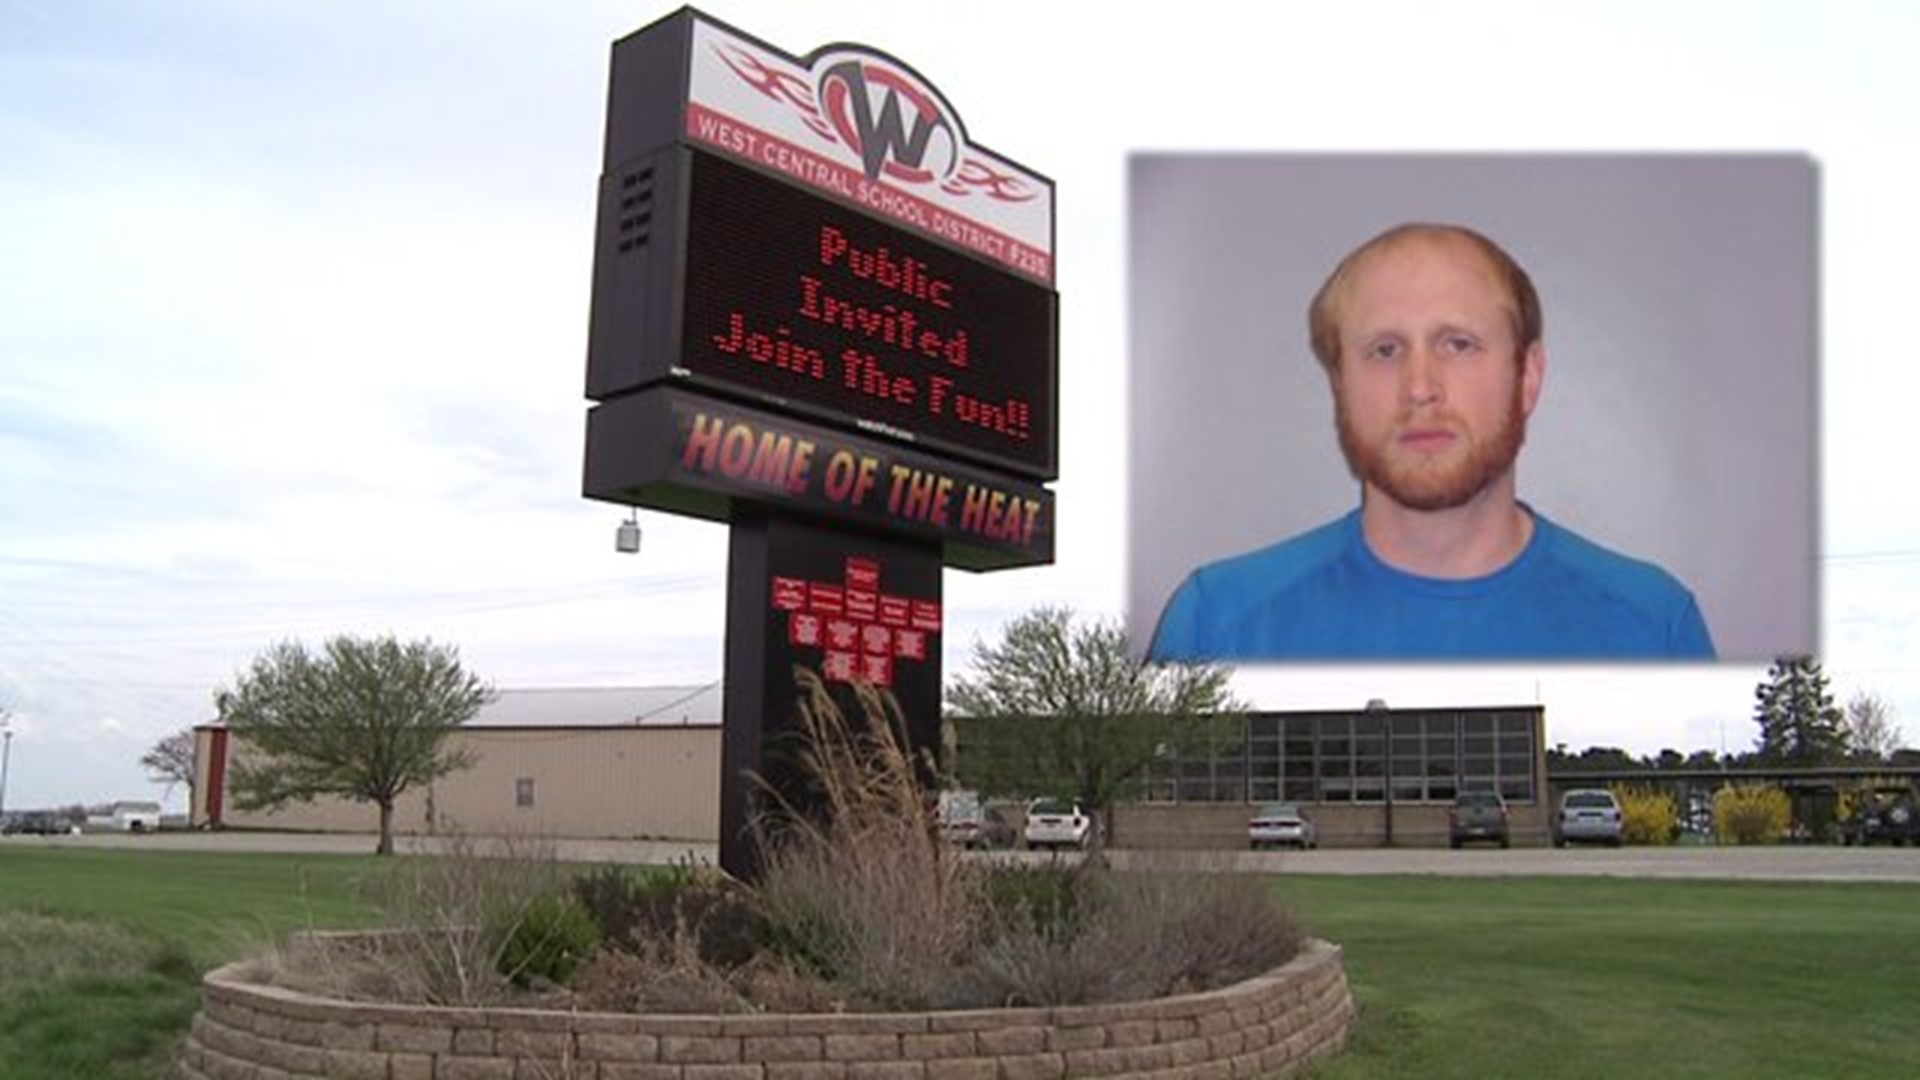 Teacher Accused of Soliciting Underage Girls